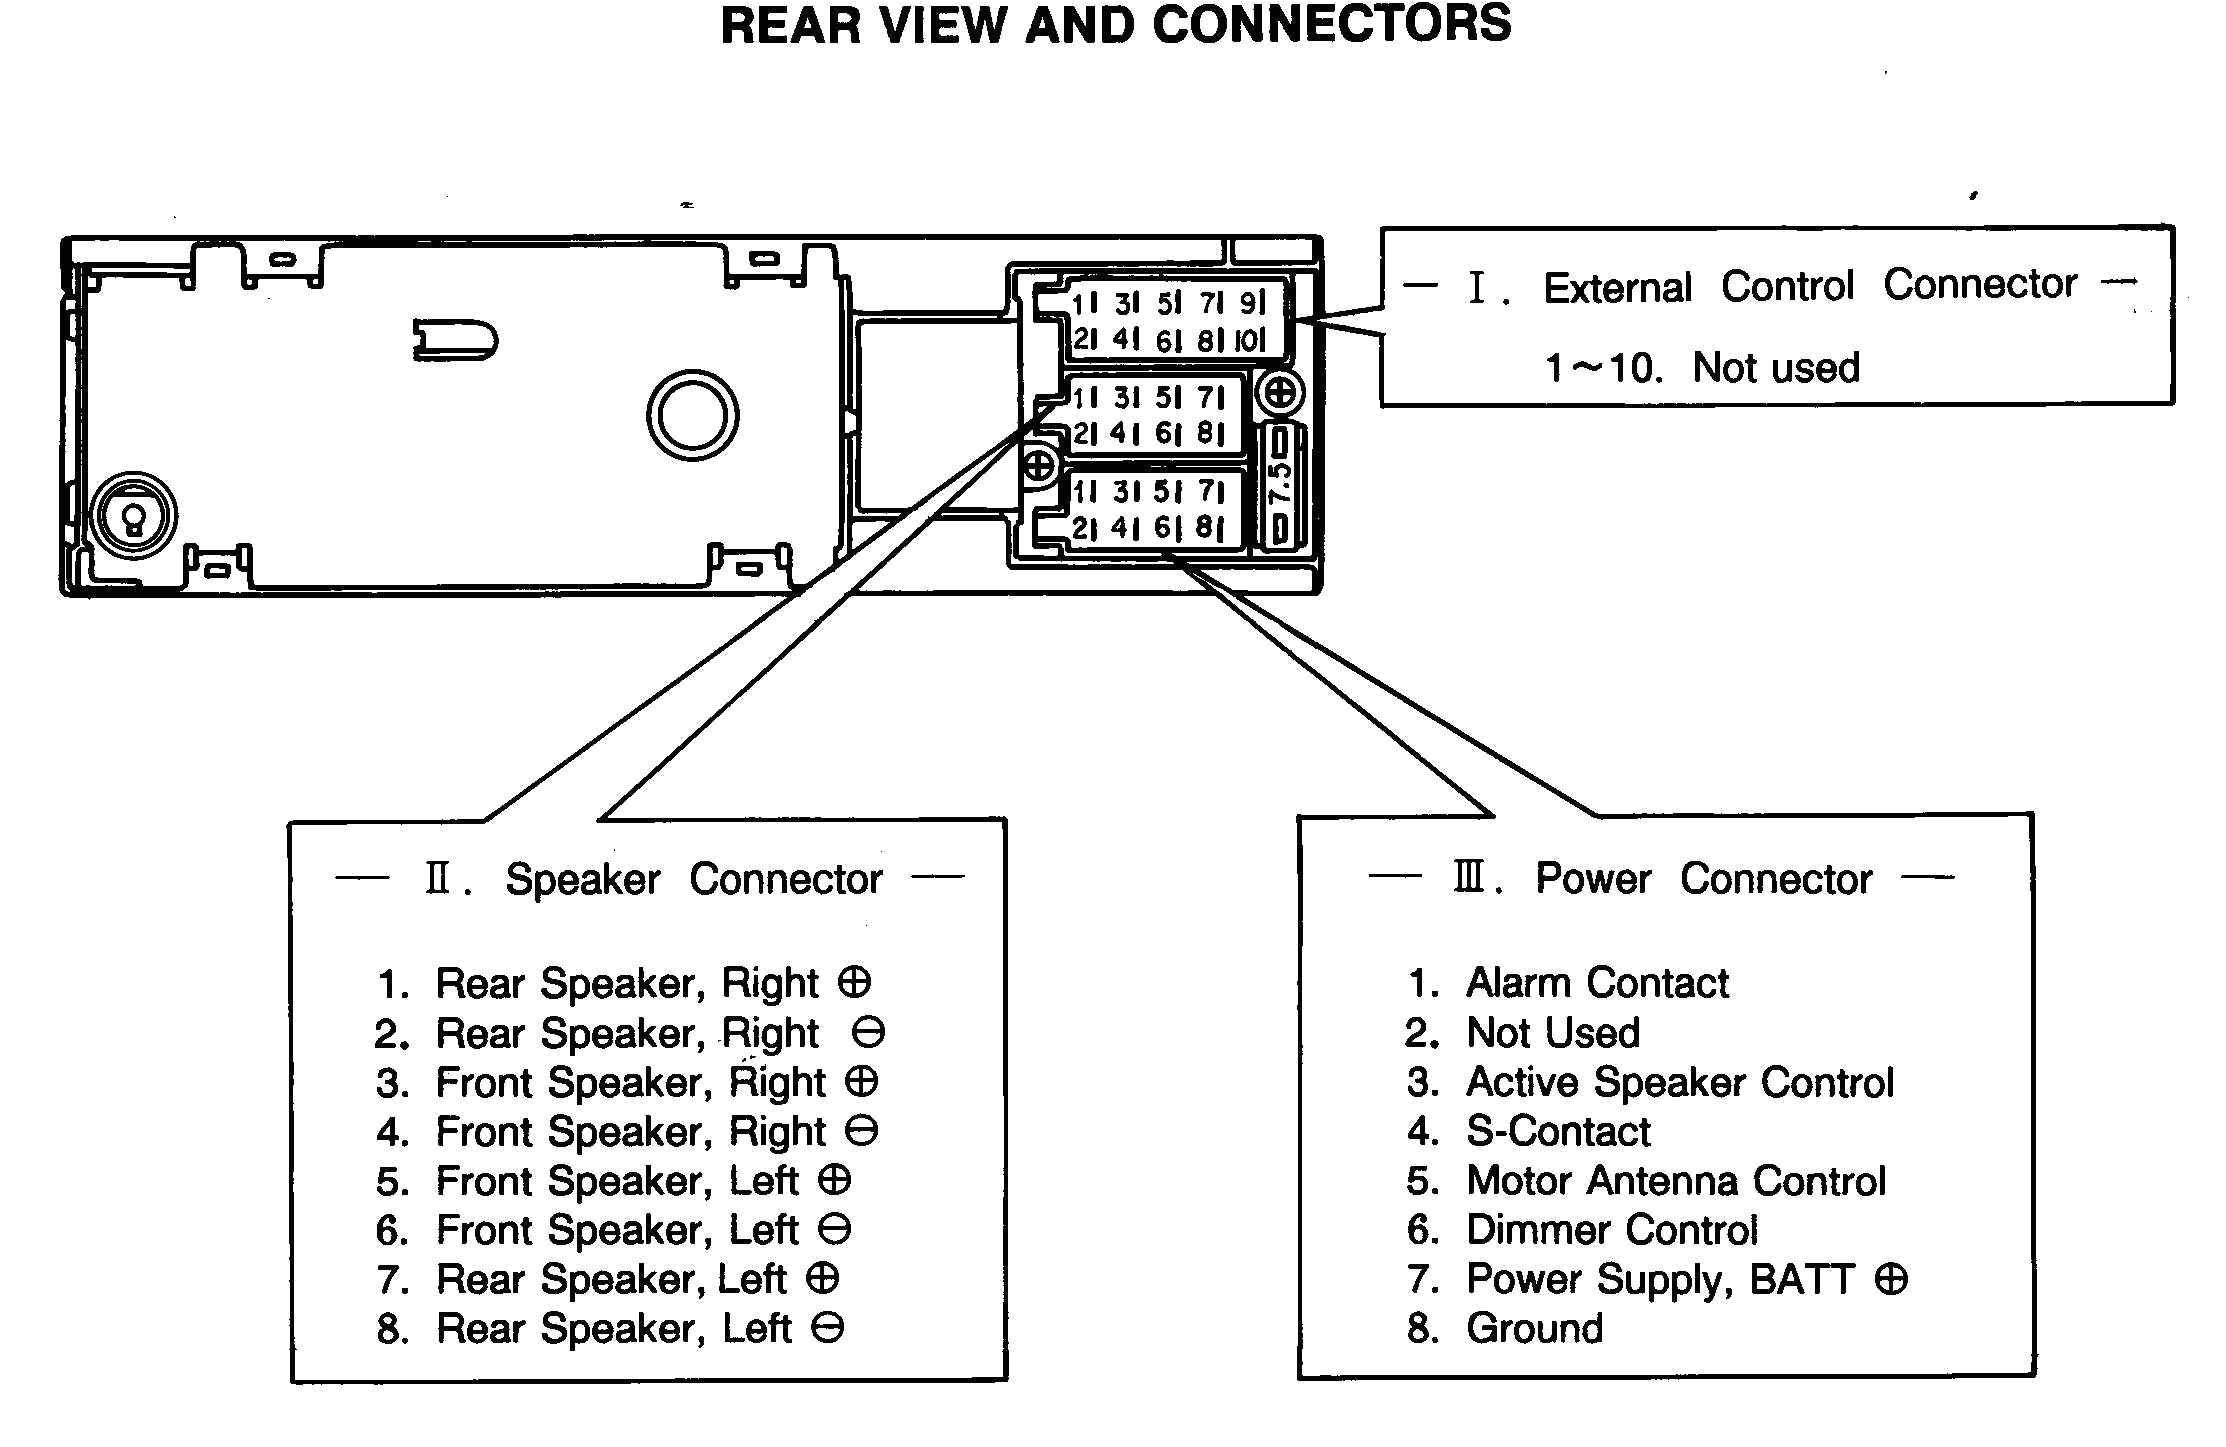 Land Rover Discovery Stereo Wiring Diagram Blaupunkt Radio Wiring Diagrams Blog Wiring Diagram